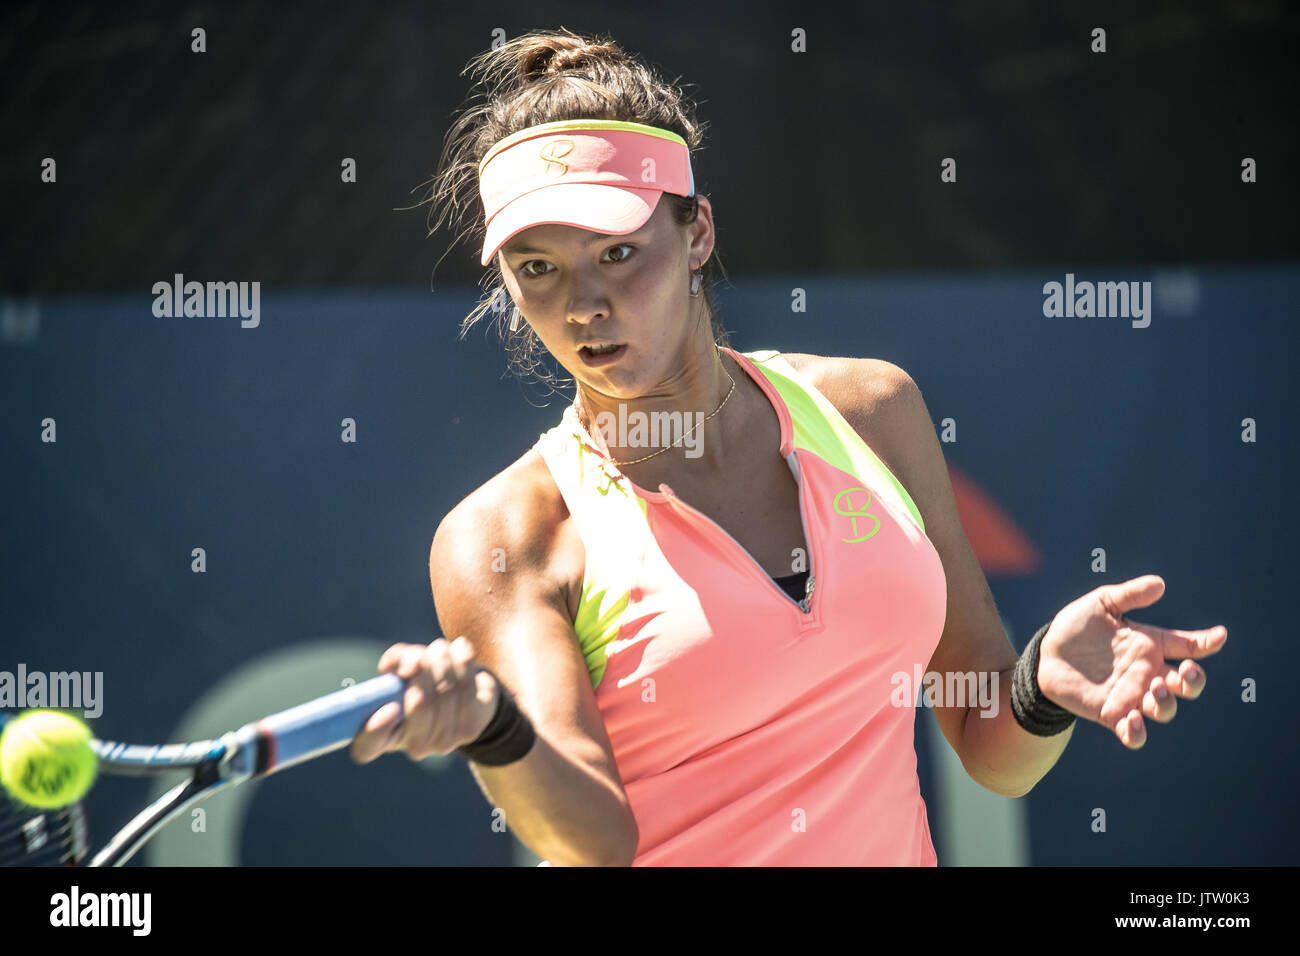 Sophie Chang (USA, photo) defeated Deniz Khazaniuk of Israel in a Citi Open  first round women's singles qualifying match 7-5 4-6 7-5 at the William  H.G. FitzGerald Tennis Stadium in Rock Creek